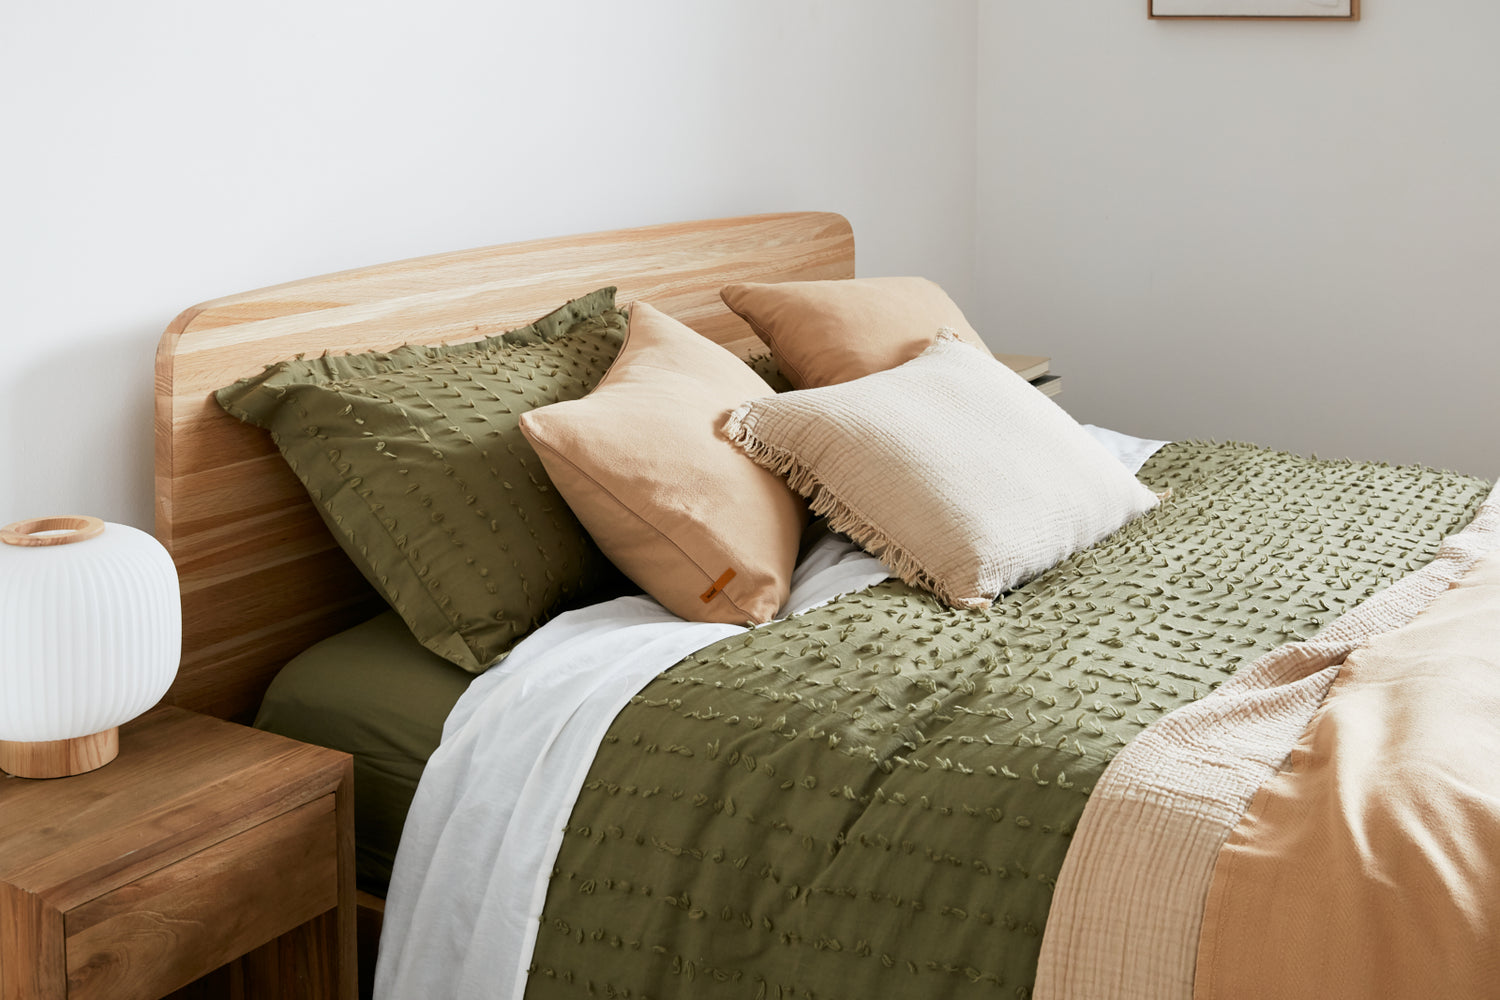 Stylist's Recommendations on How to Mix and Match Your Shore Bed Linen